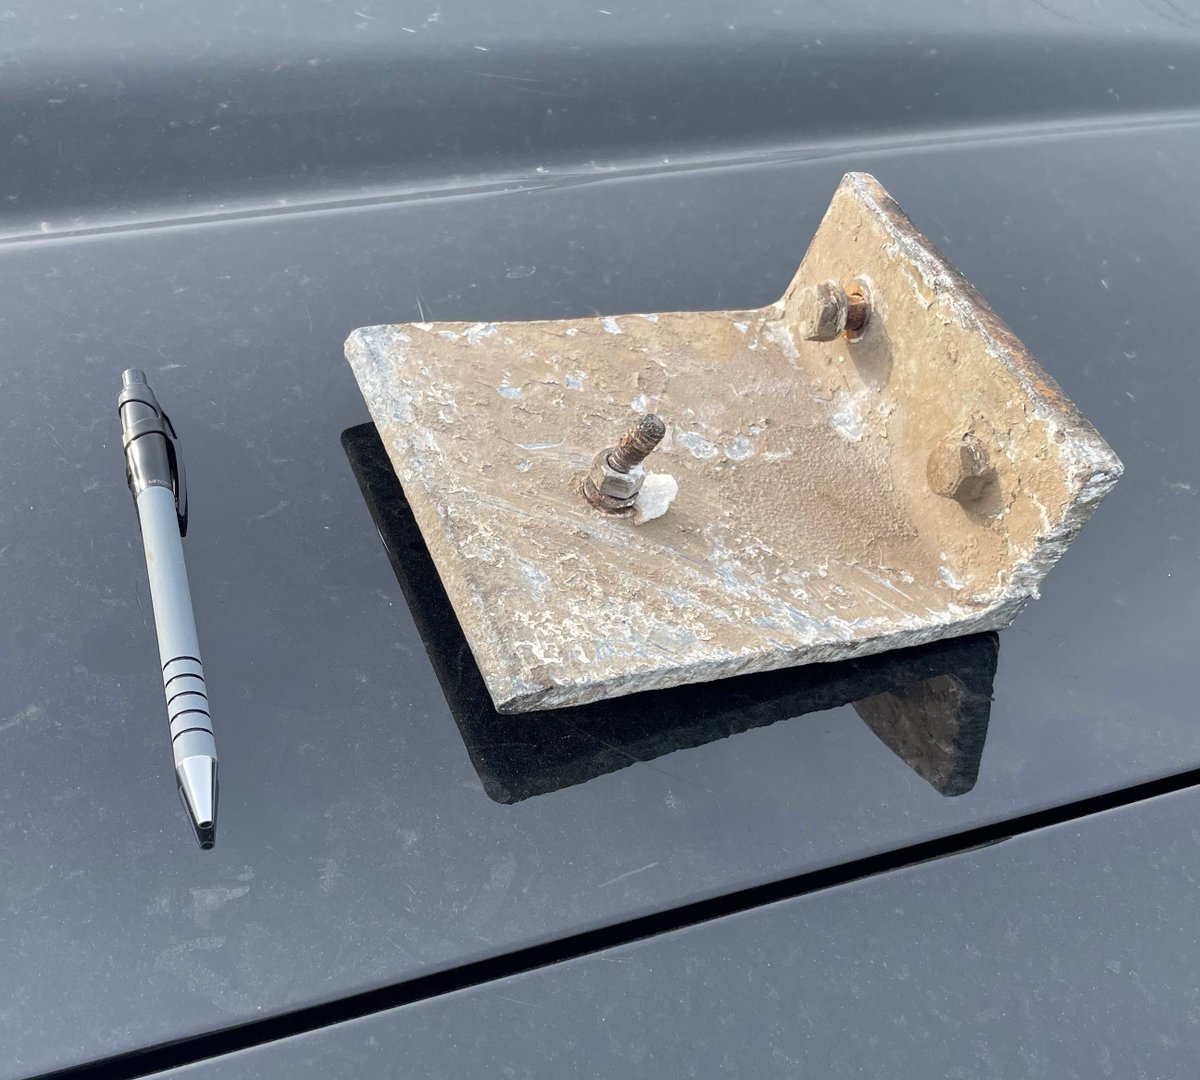 At 7:30am on #Hwy403 near King Rd, #BurlingtonOPP attended for metal debris on the road that was kicked up by another vehicle, crashing through the front windshield of a pickup truck, narrowly missing the 2 occupants and landing on the floor of the back seat. No injuries. ^rt